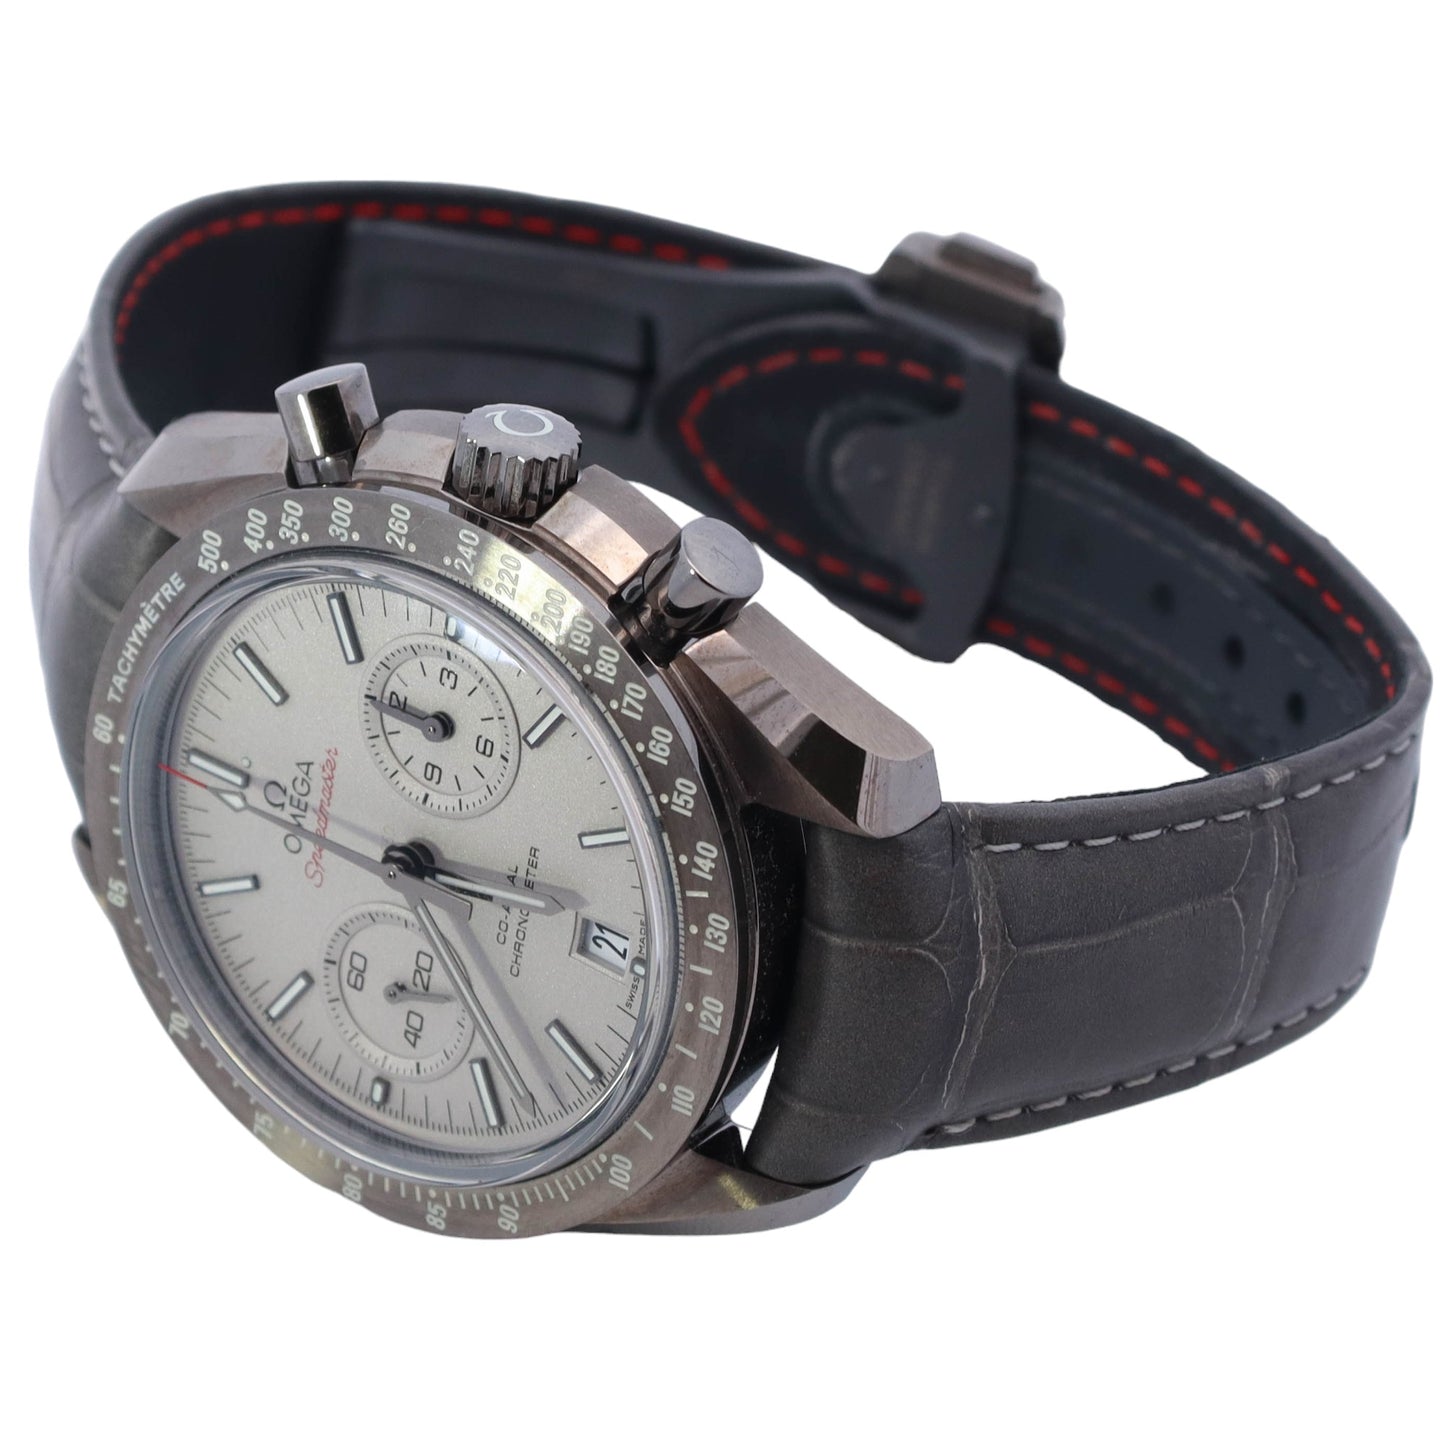 Omega Speedmaster "Grey Side Of The Moon" Ceramic Light Grey Chronograph Dial Watch Reference# 311.93.44.51.99.002